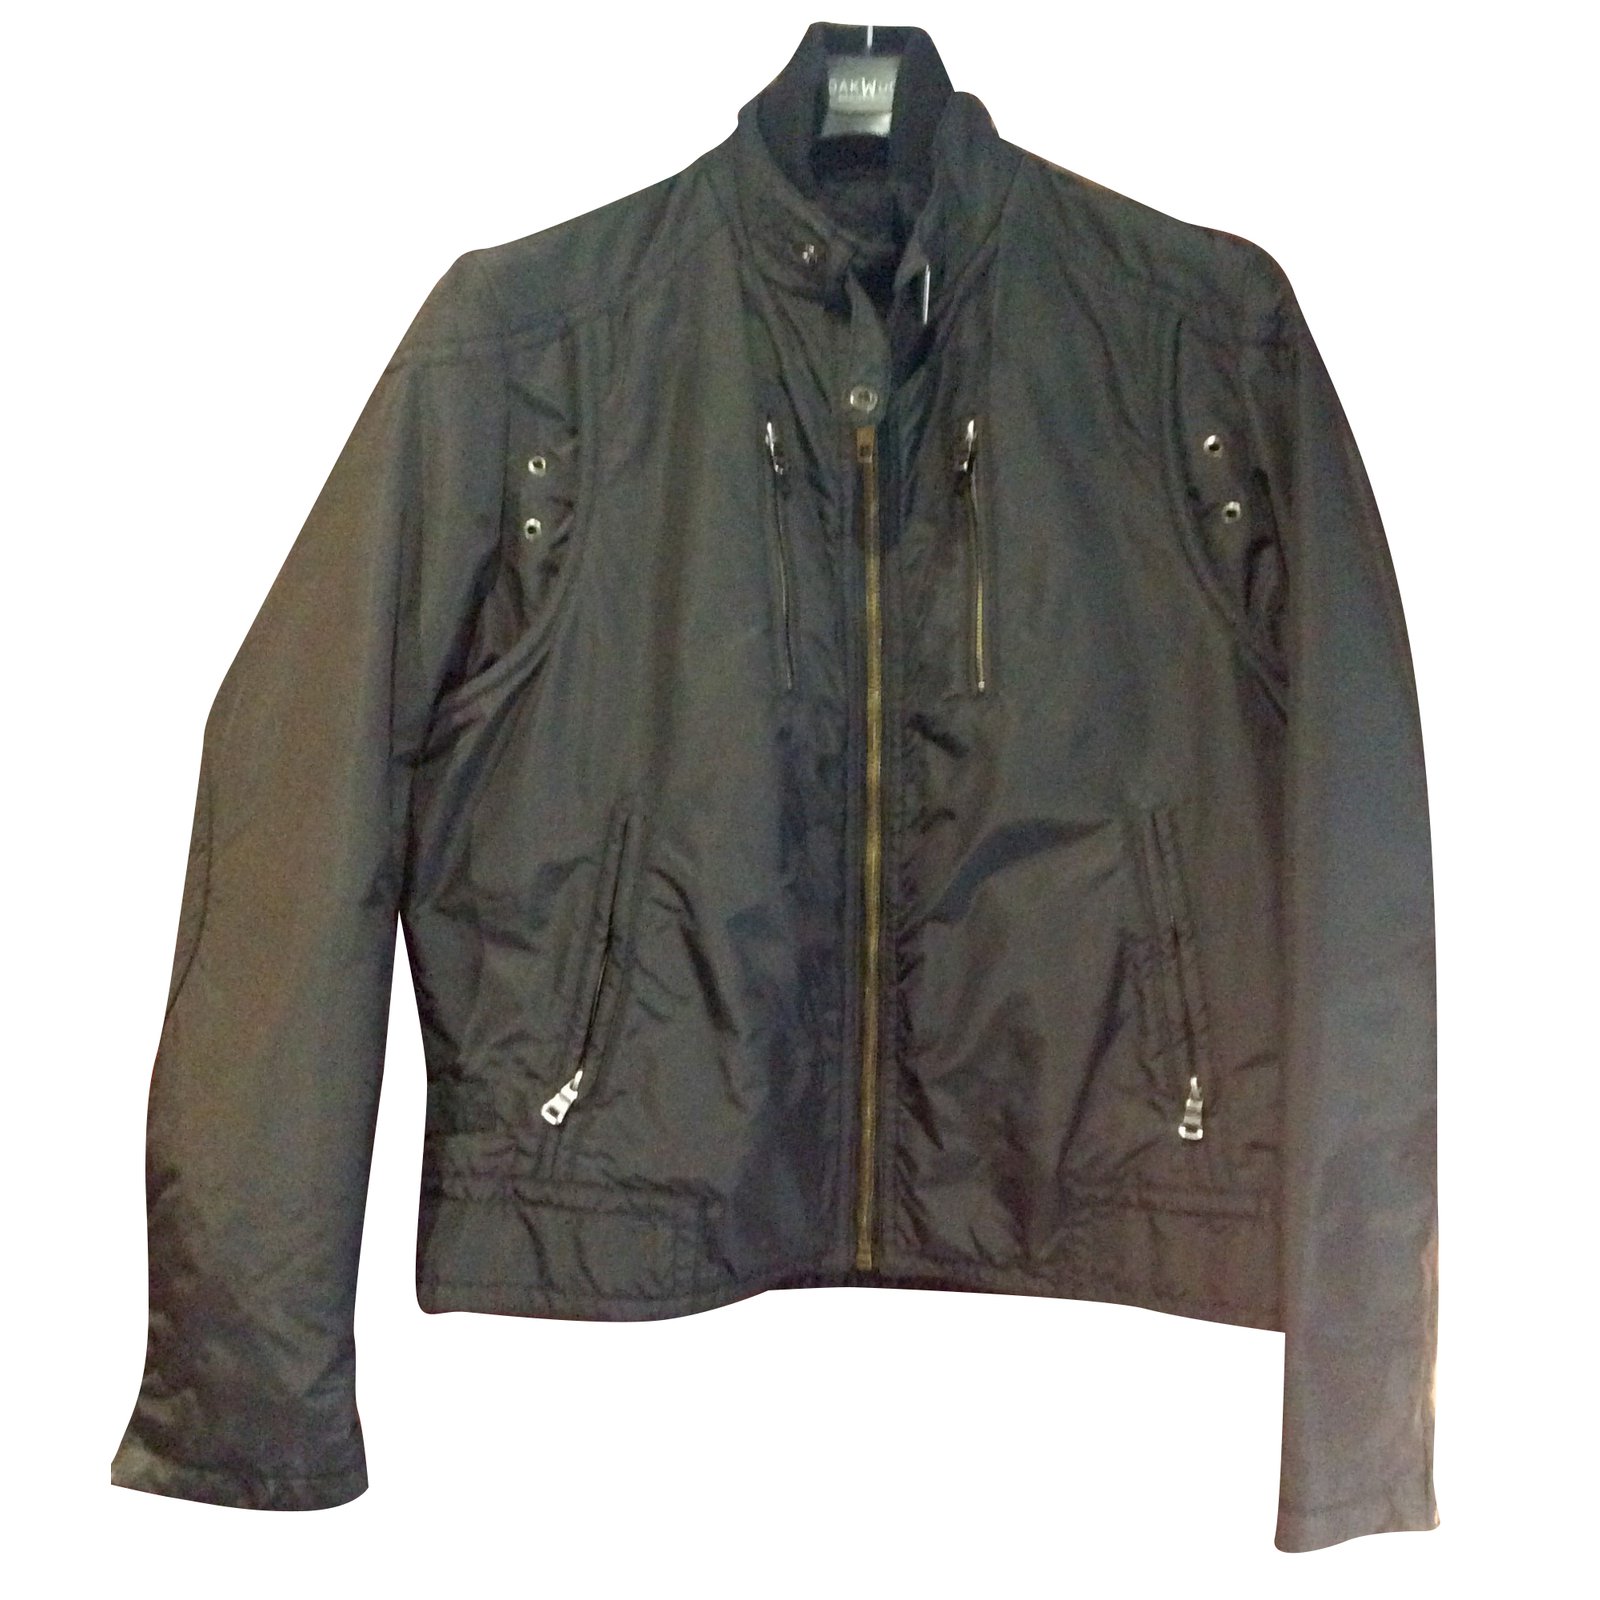 Laverapelle Men's Genuine Lambskin Leather Jacket (Black, Extra Small,  polyester Lining) - 1501535 at Amazon Men's Clothing store